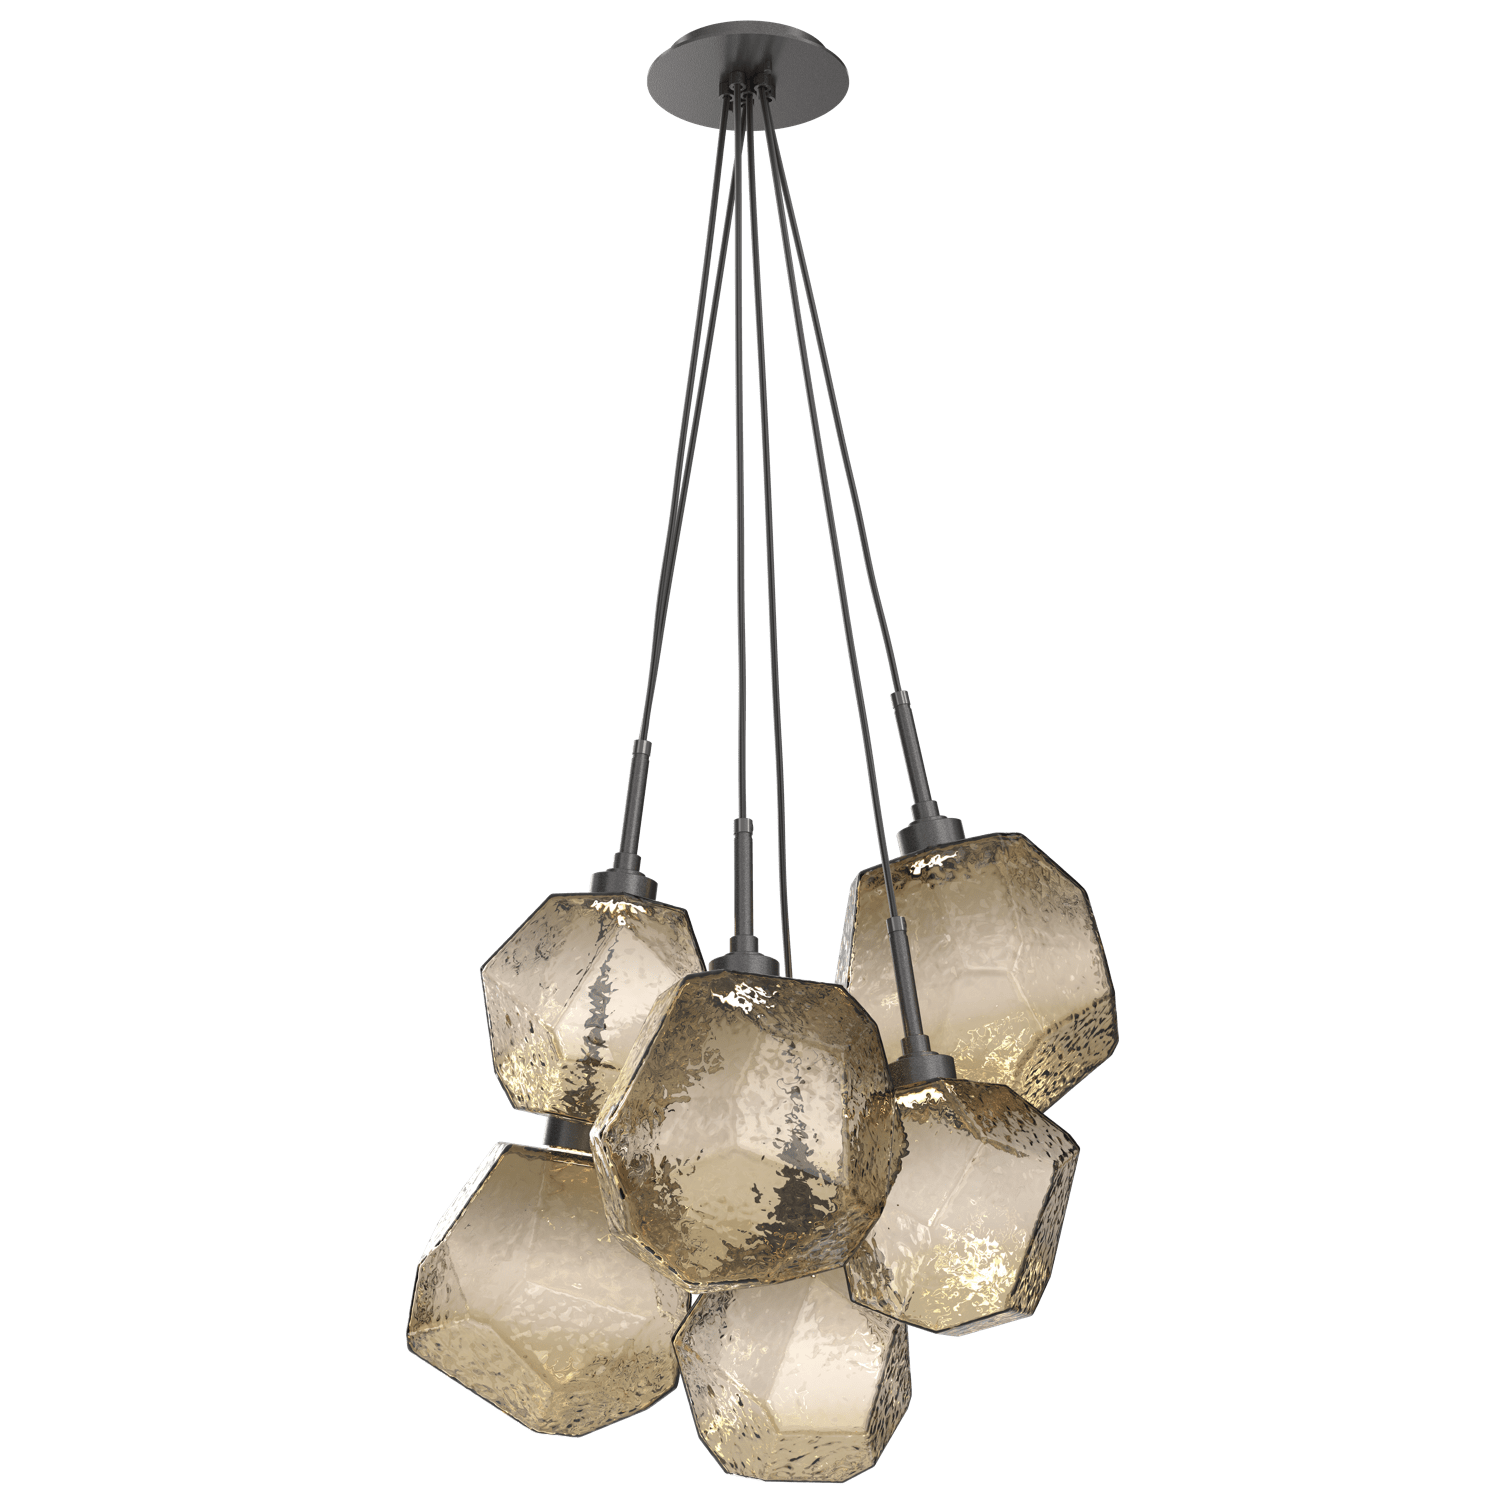 CHB0039-0F-GP-B-Hammerton-Studio-Gem-6-light-cluster-pendant-light-with-graphite-finish-and-bronze-blown-glass-shades-and-LED-lamping